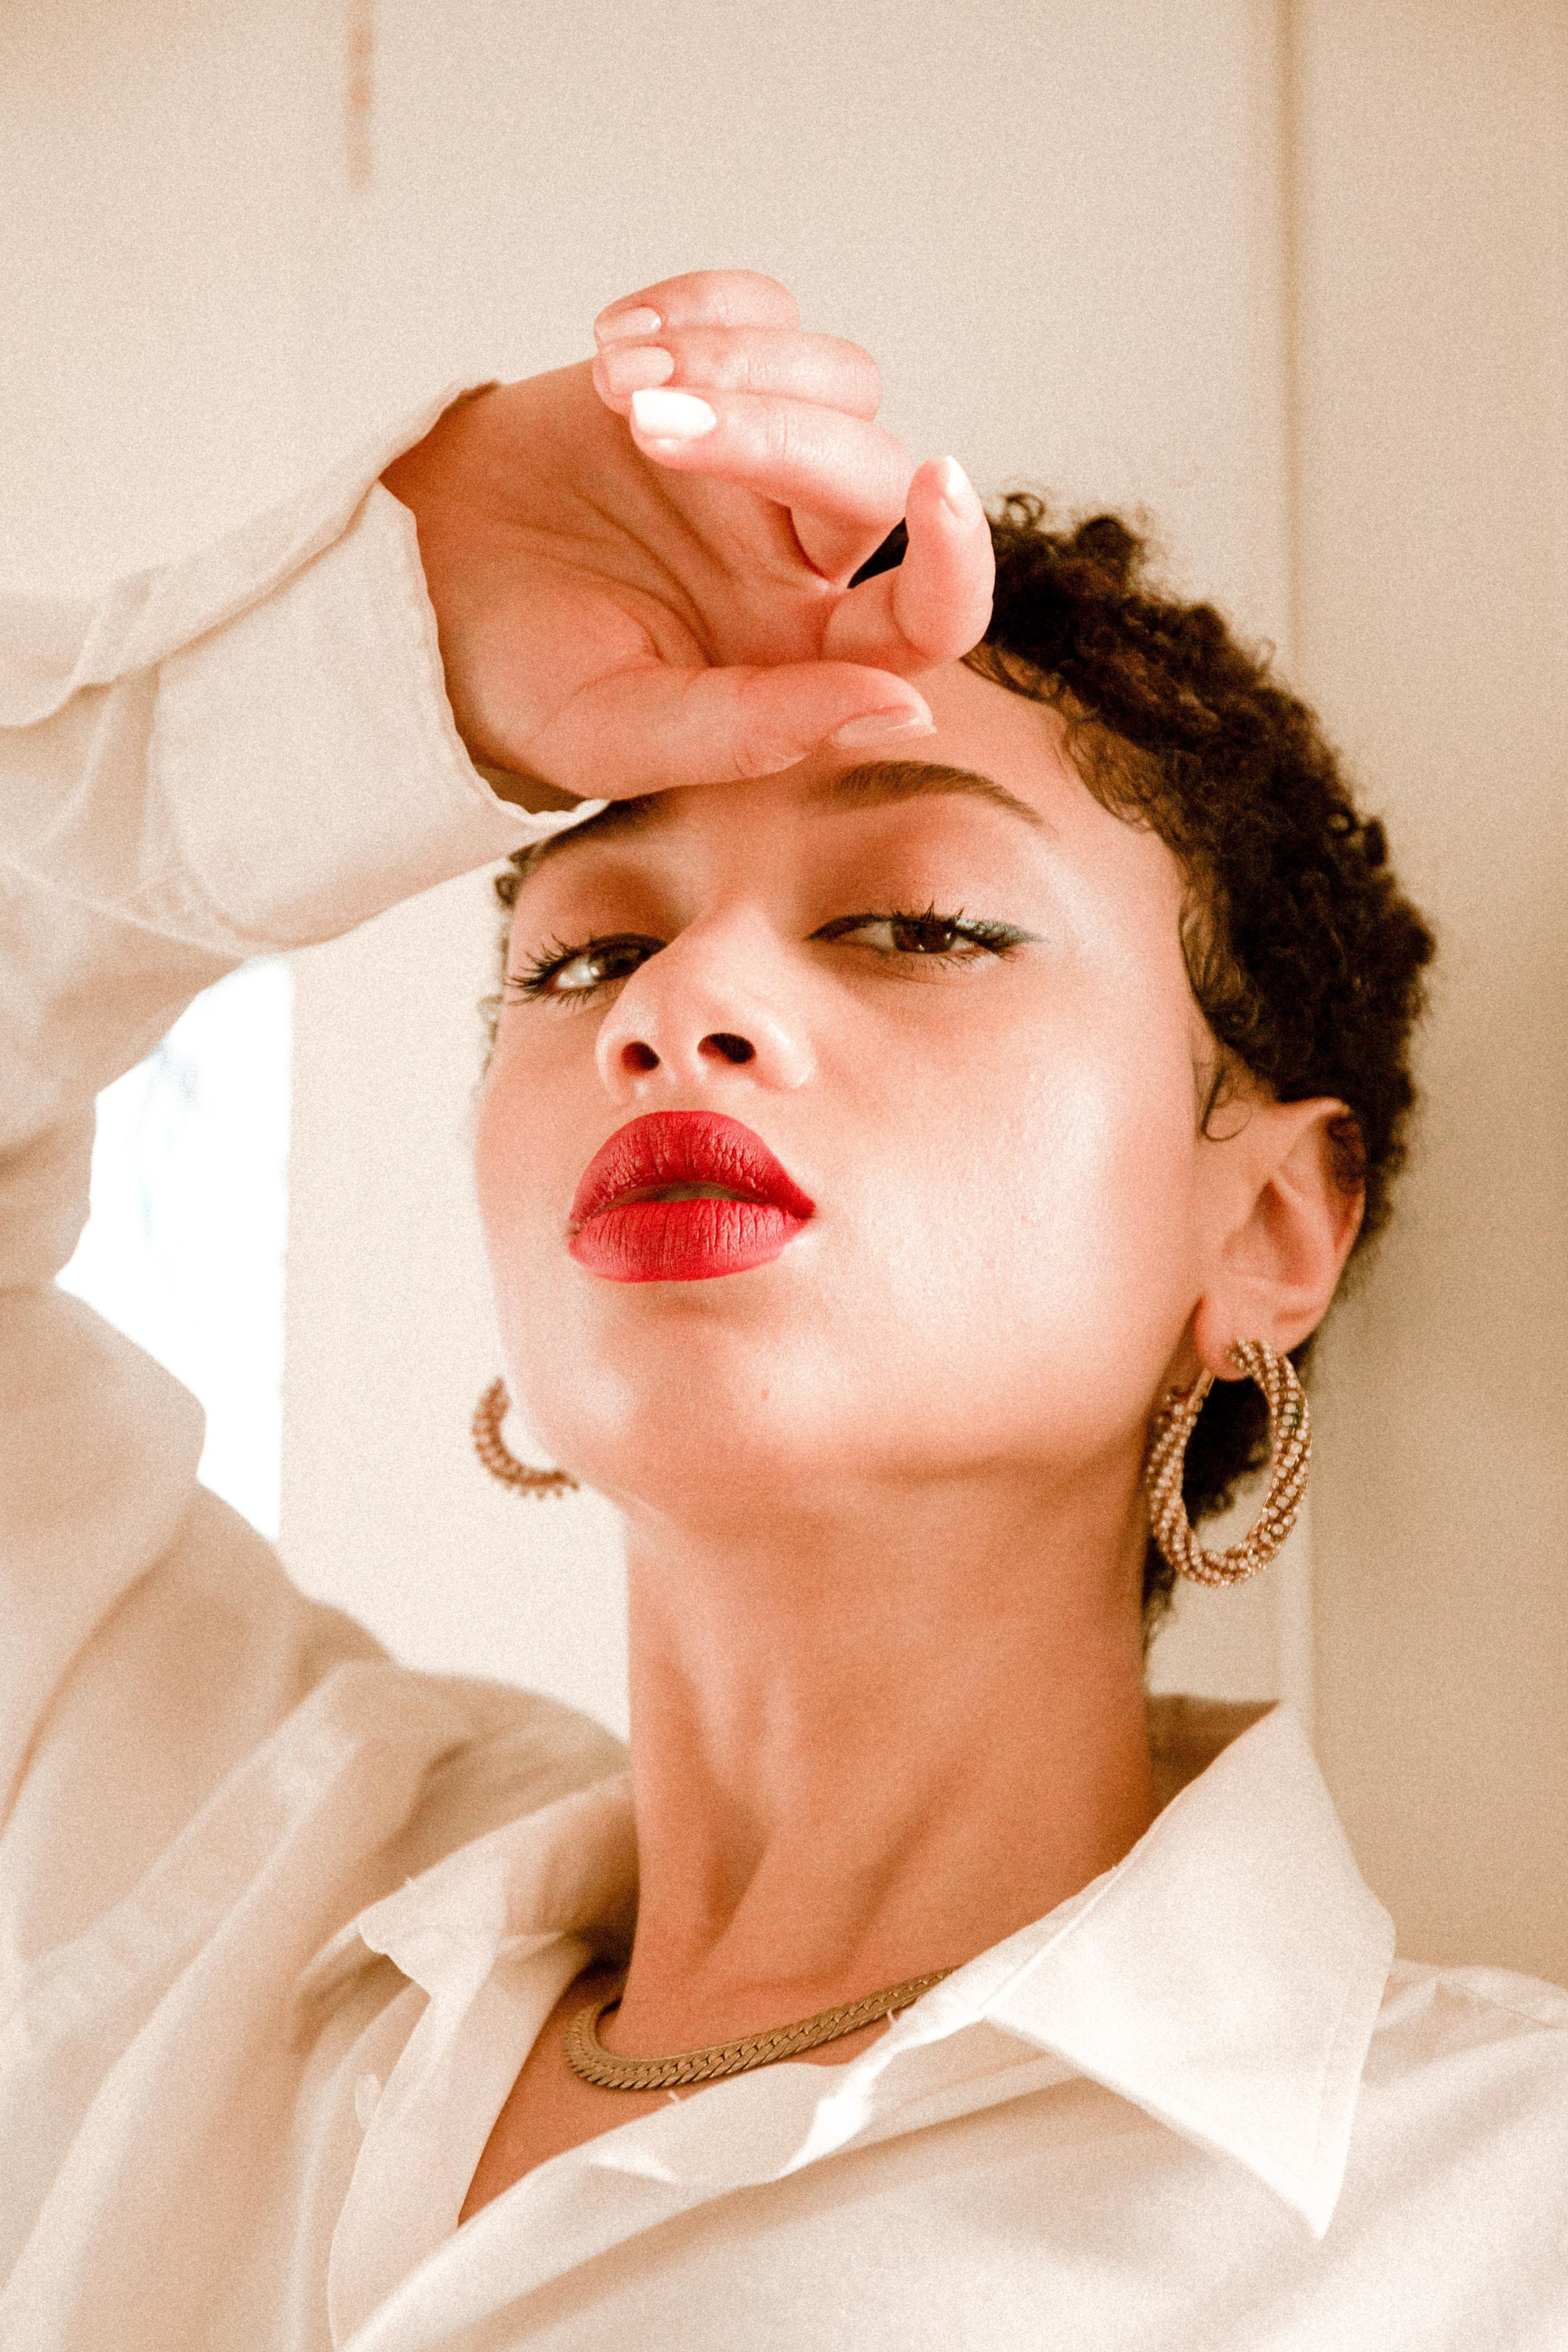 The History of Red Lipstick